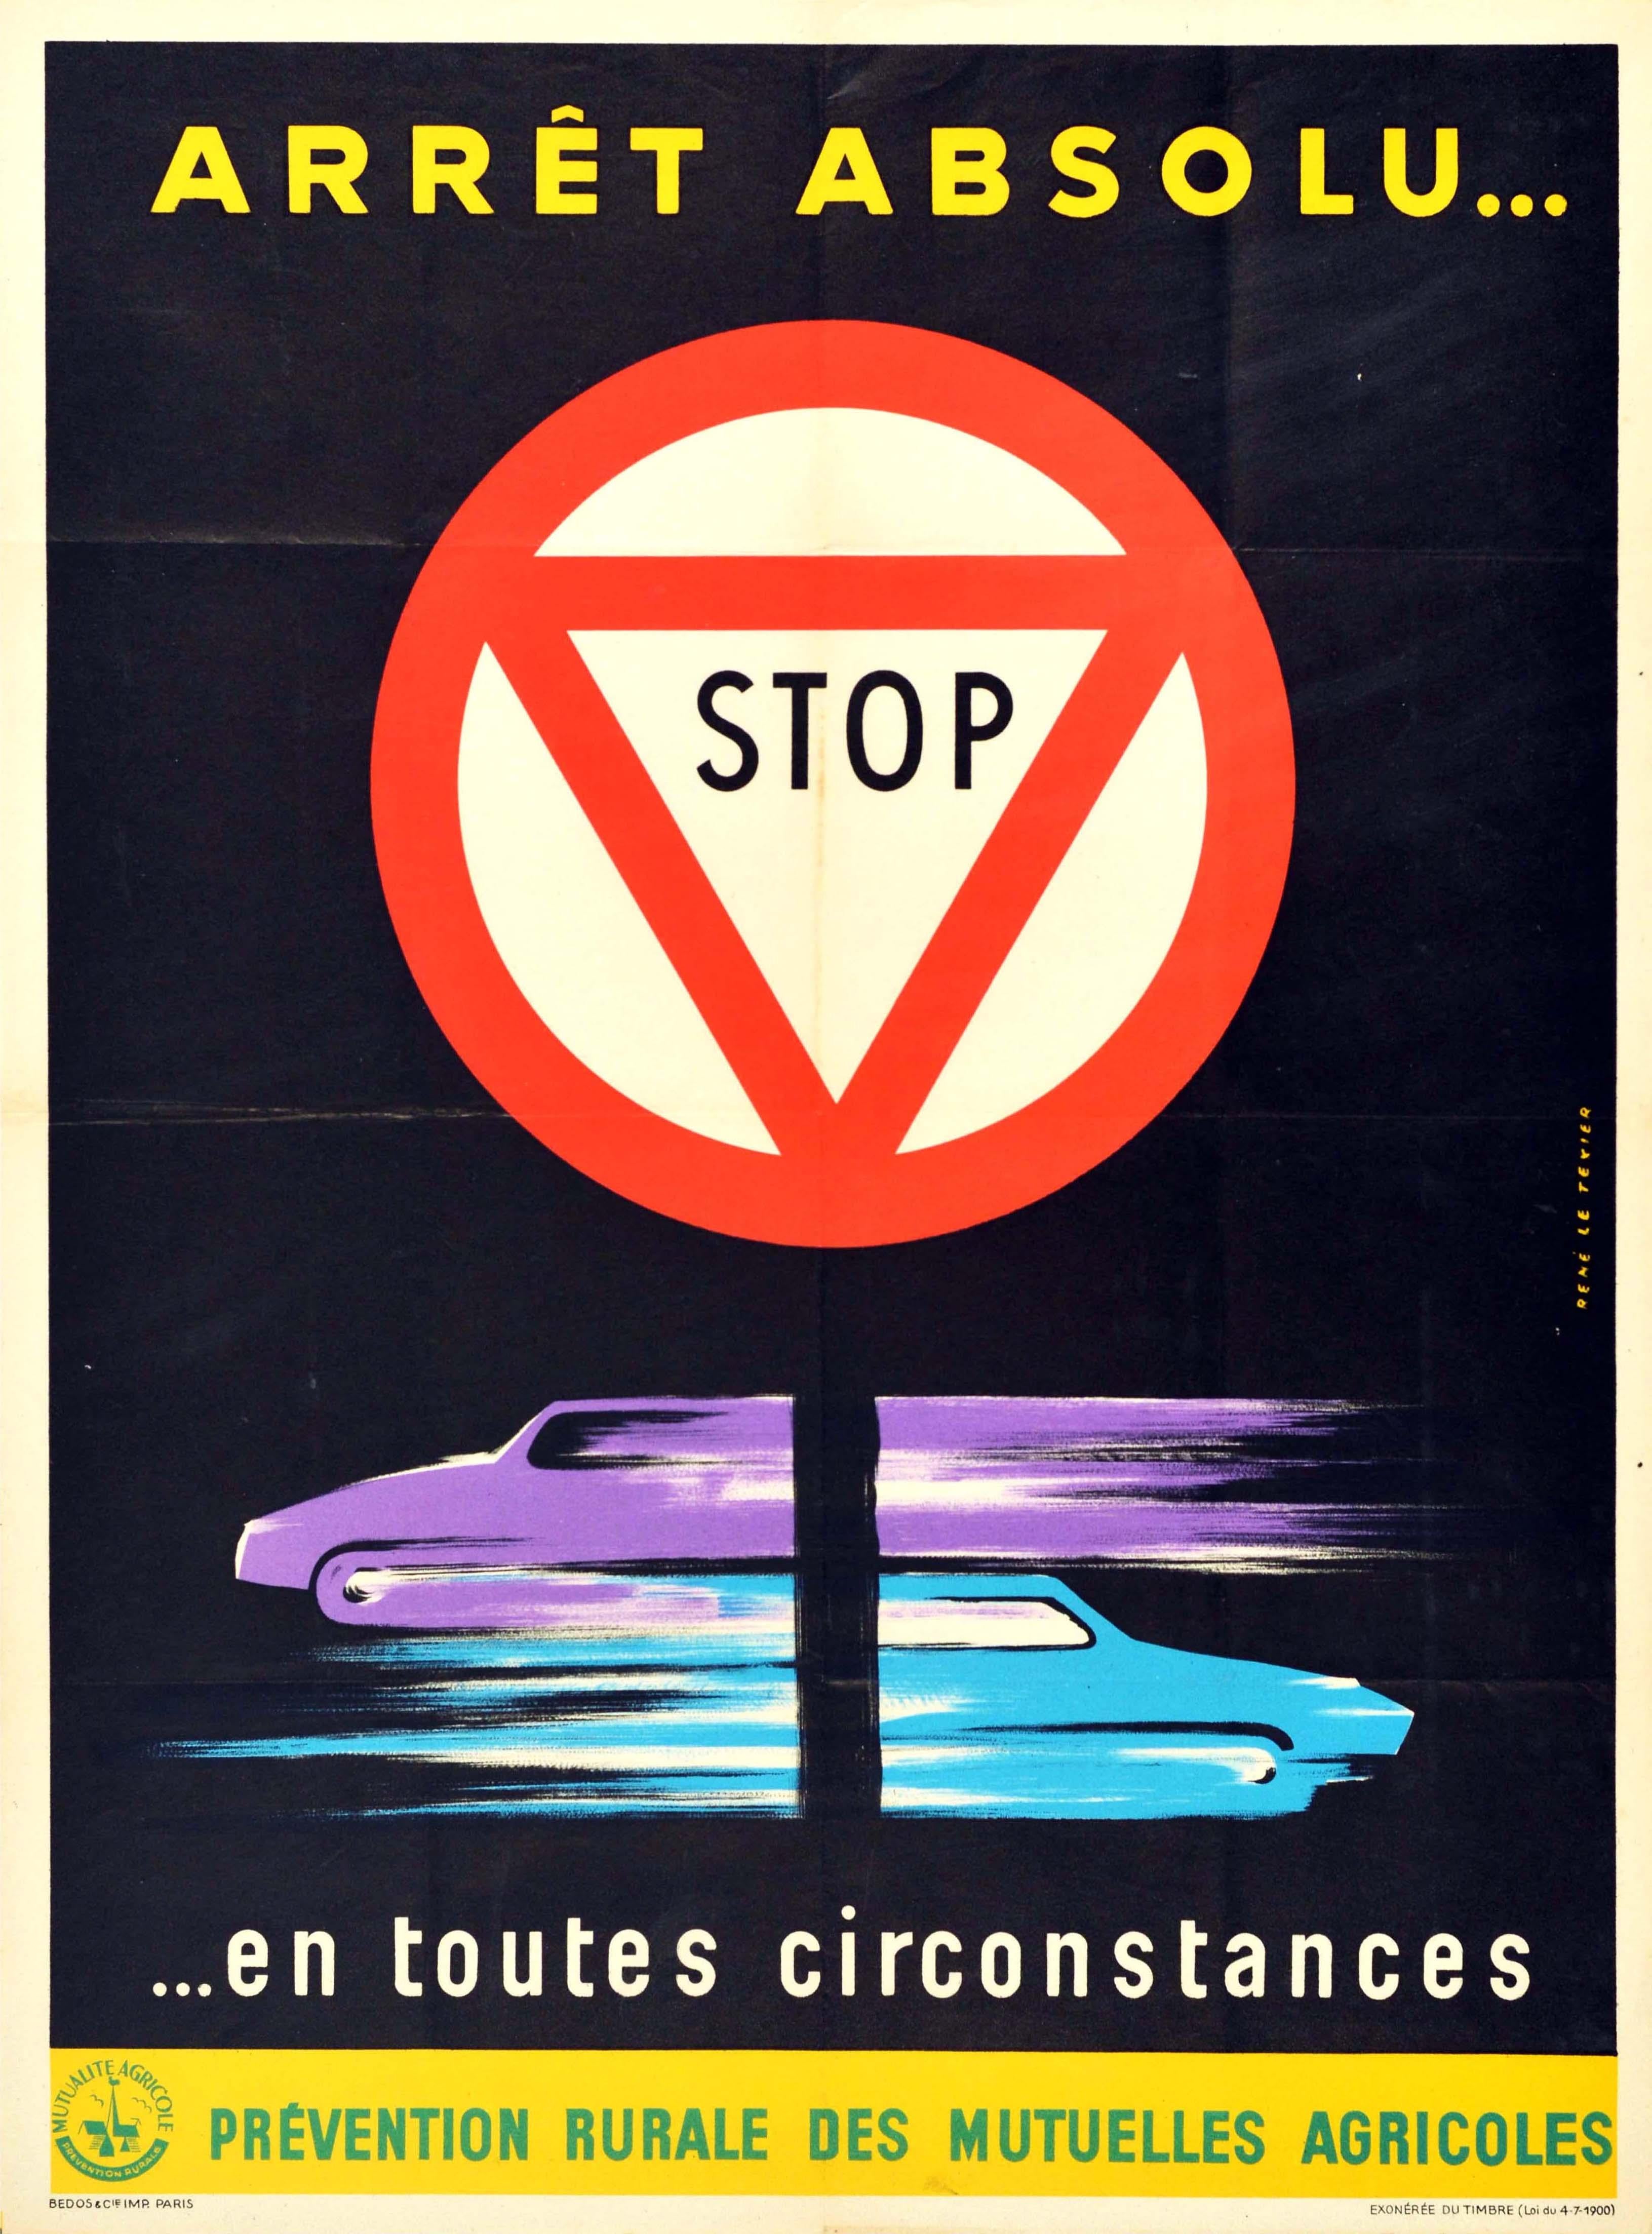 Unknown Print - Original Vintage Poster French Road Safety Stop Sign Arret Absolu Speeding Cars